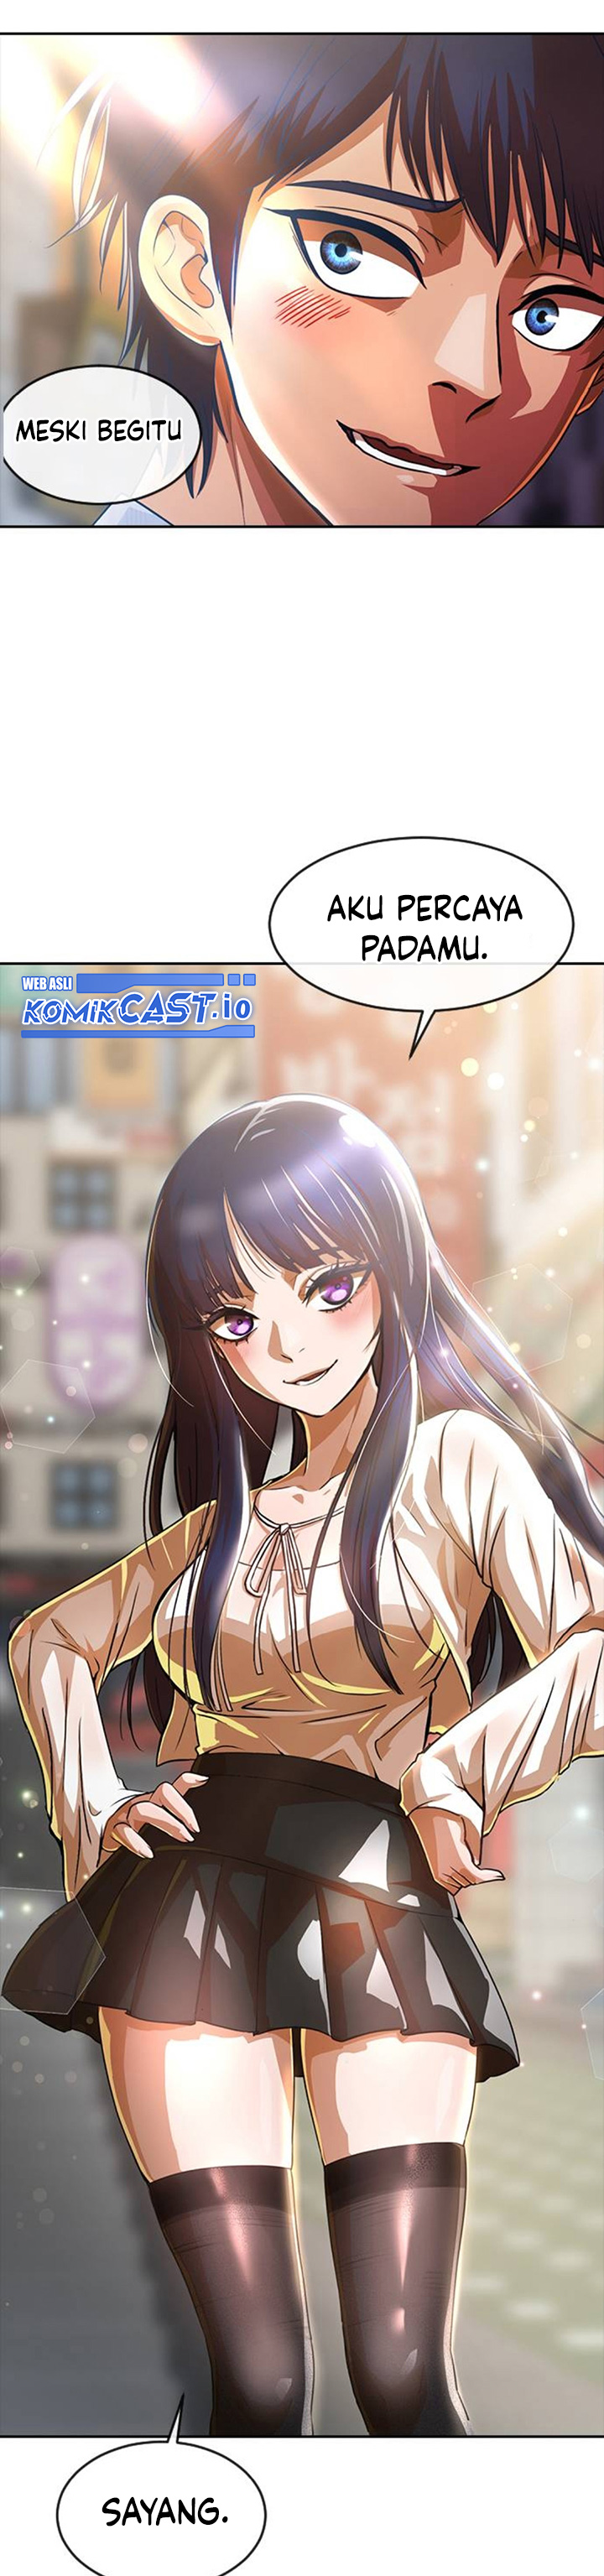 The Girl from Random Chatting! Chapter 279